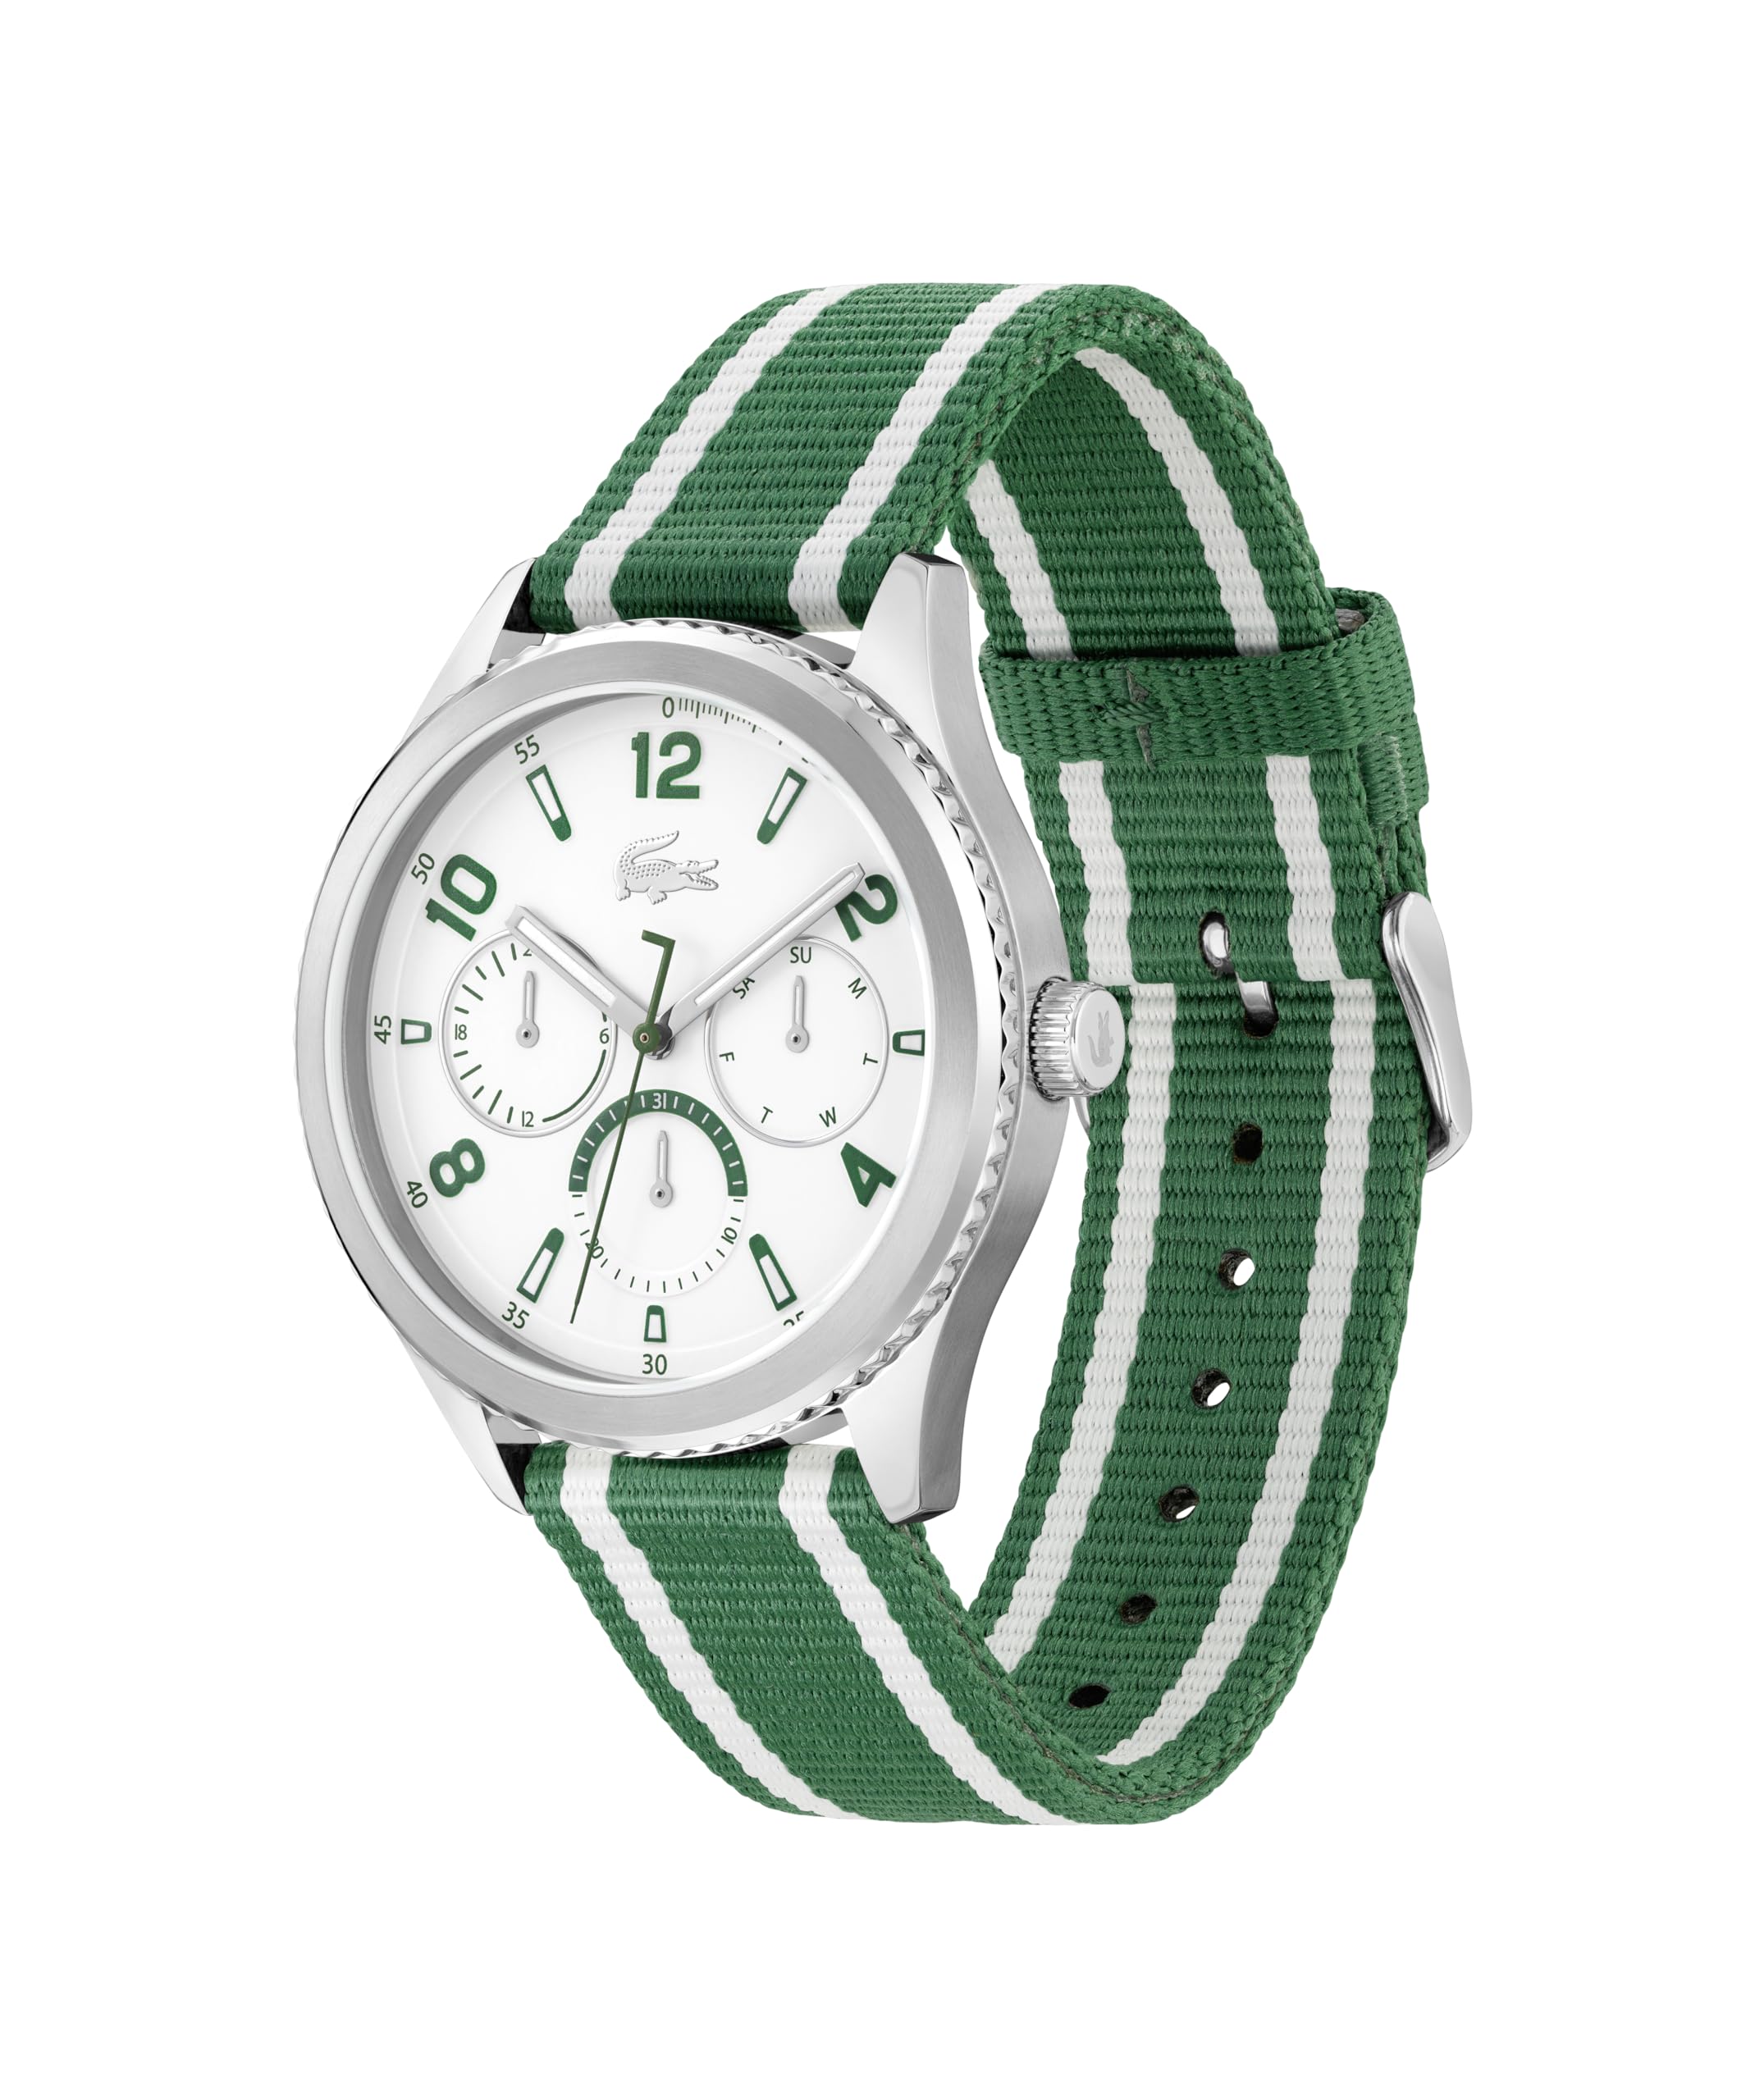 Lacoste Men's Deuce Quartz Multifunction Water-Resistant Chronograph Watch with Recycled Ocean Waste Strap, Model: 2011289